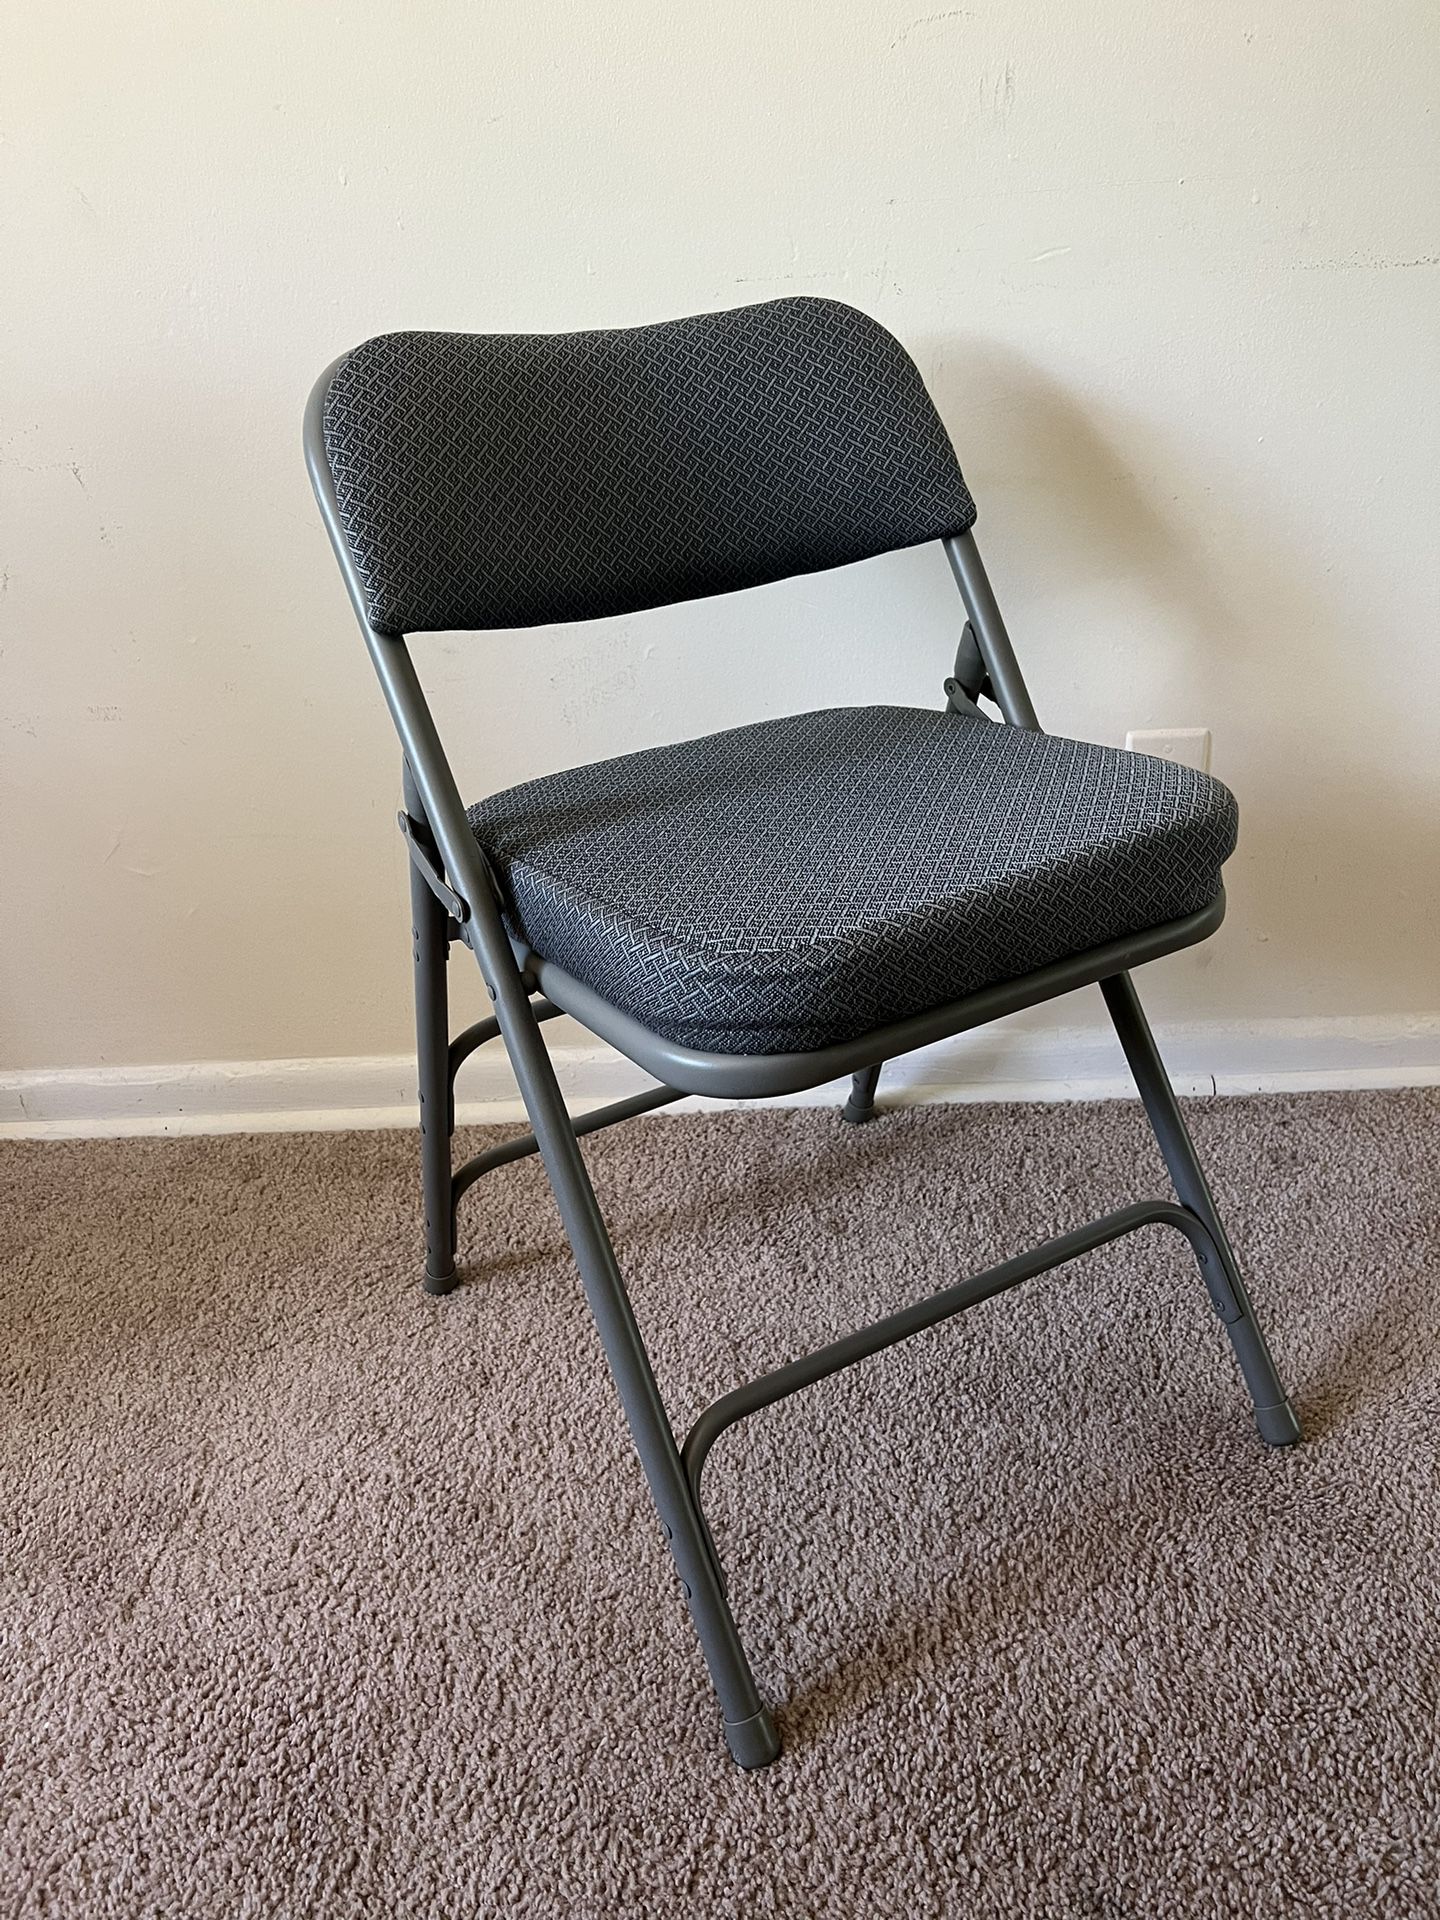 Comfortable Folding Chairs (Set of 4)